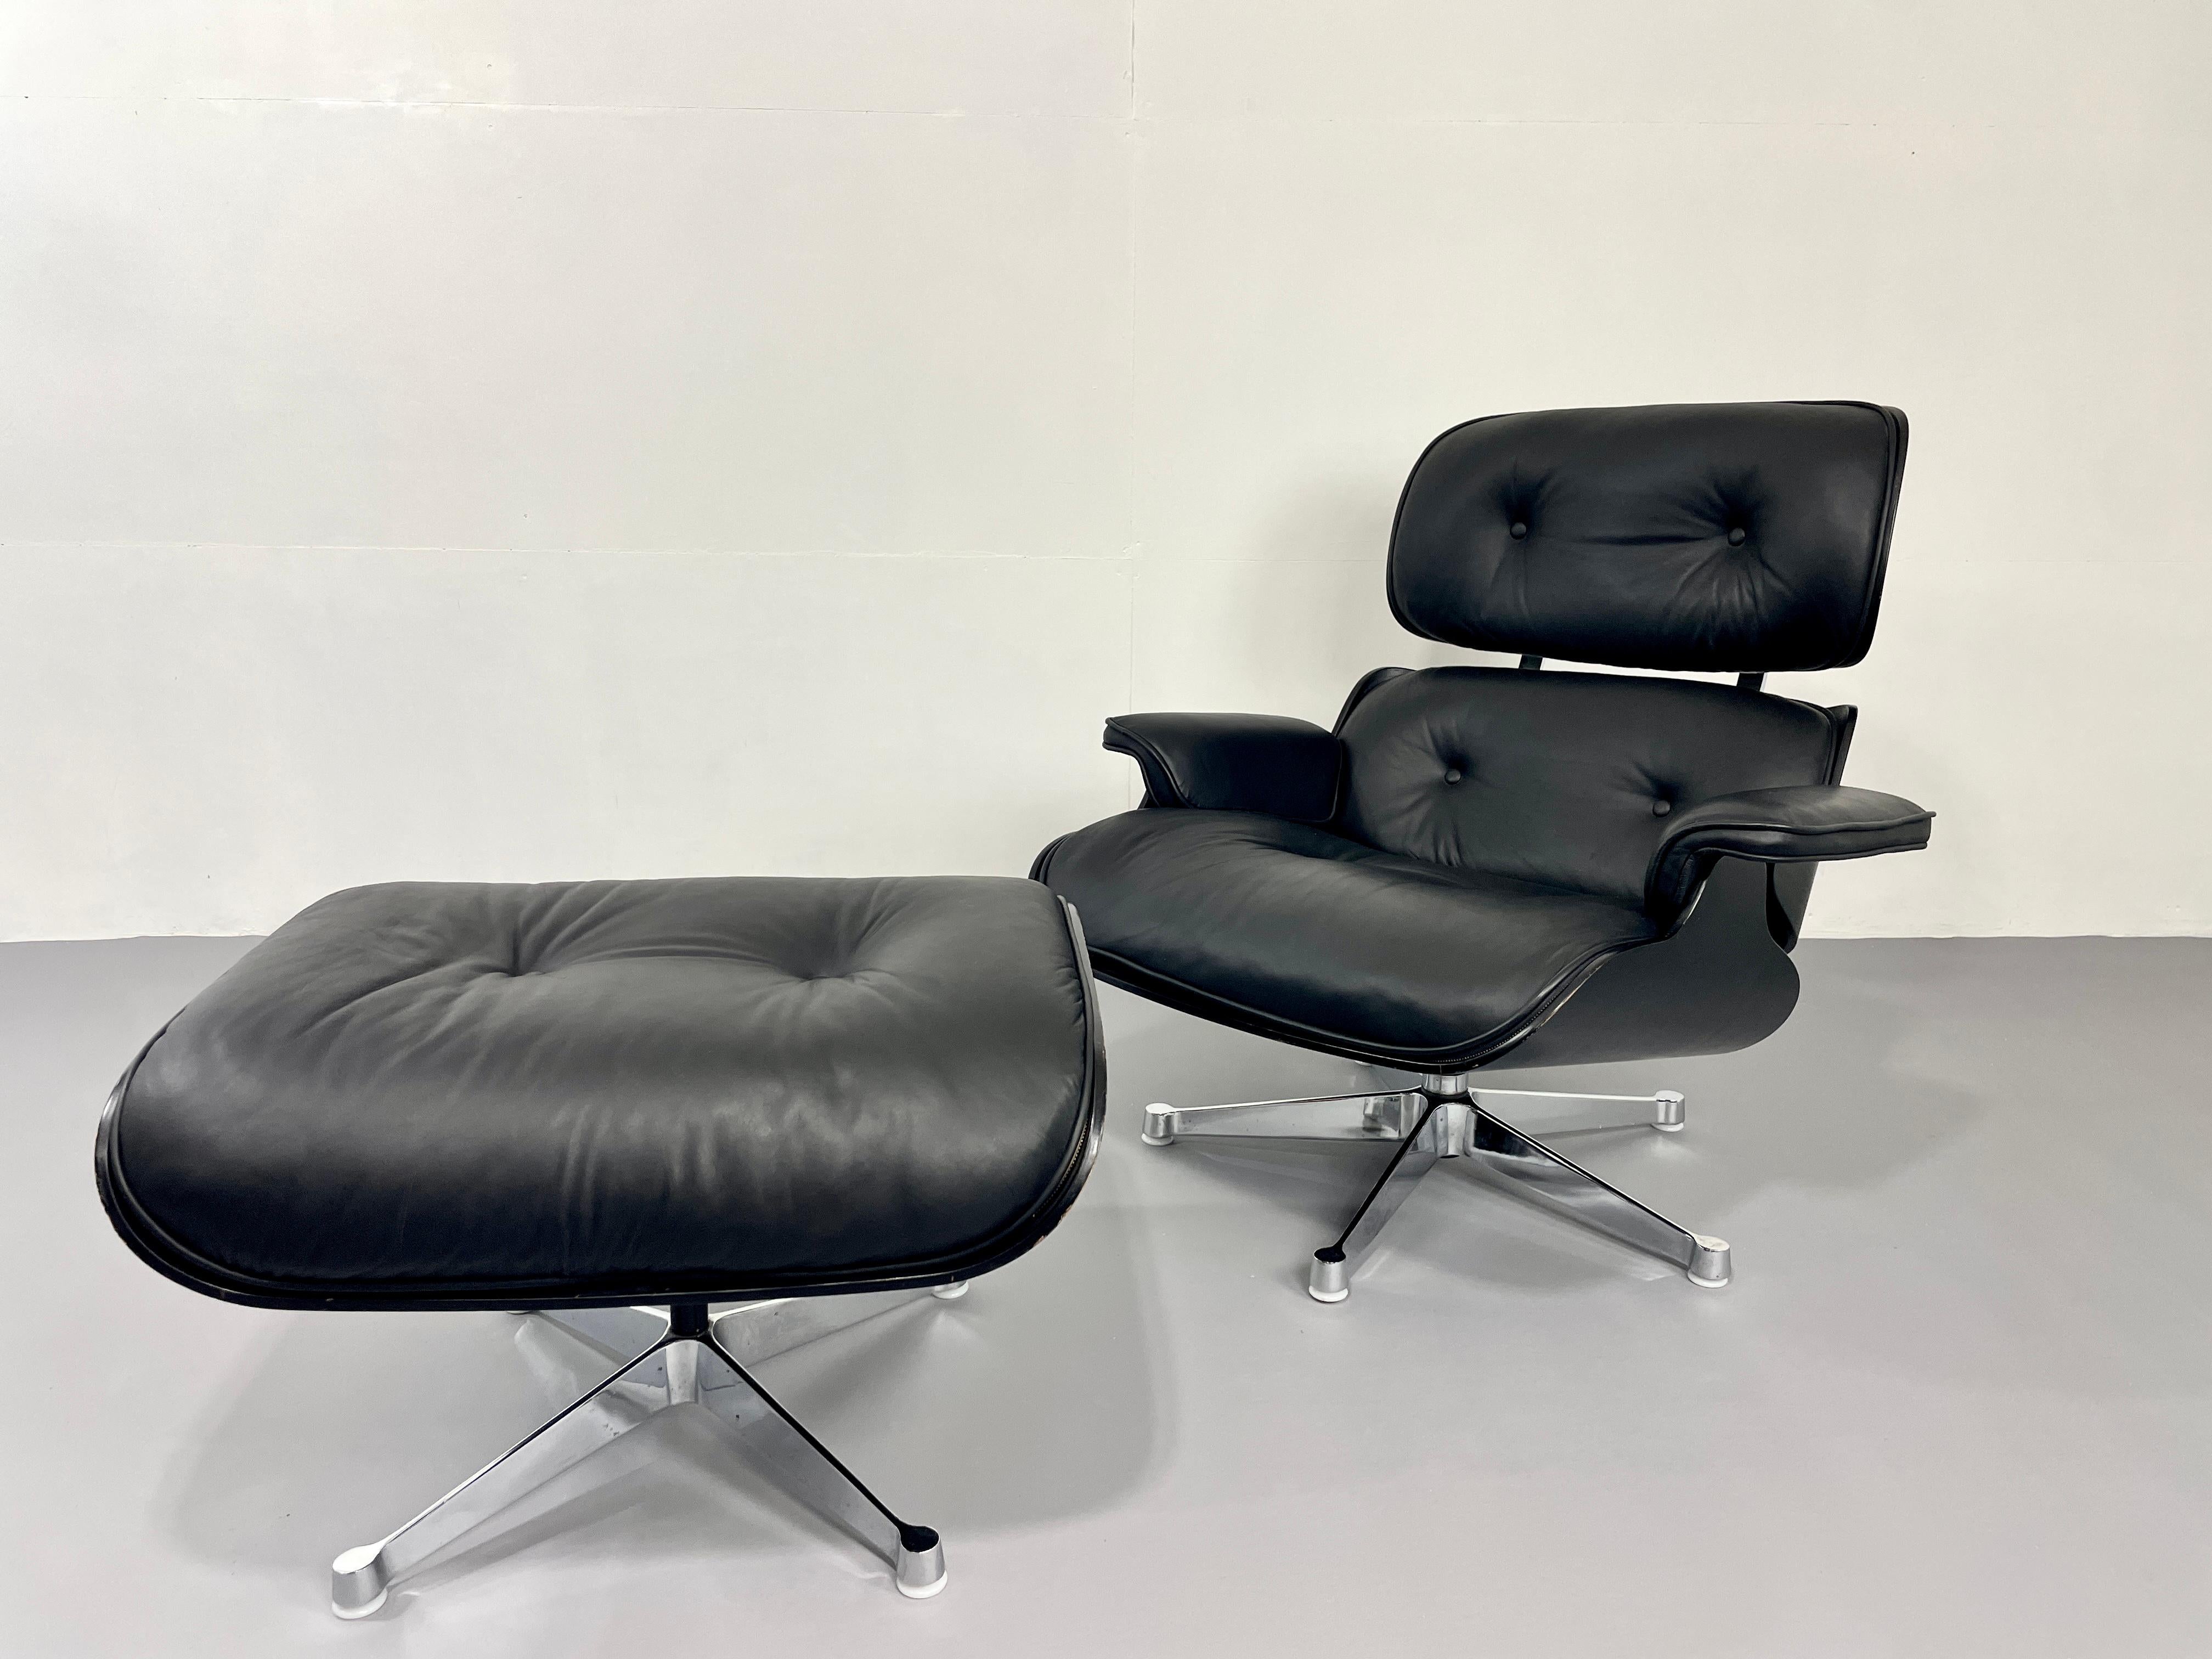 Black vintage Herman Miller Lounge Chair with Ottoman, designed by Eames  For Sale 7